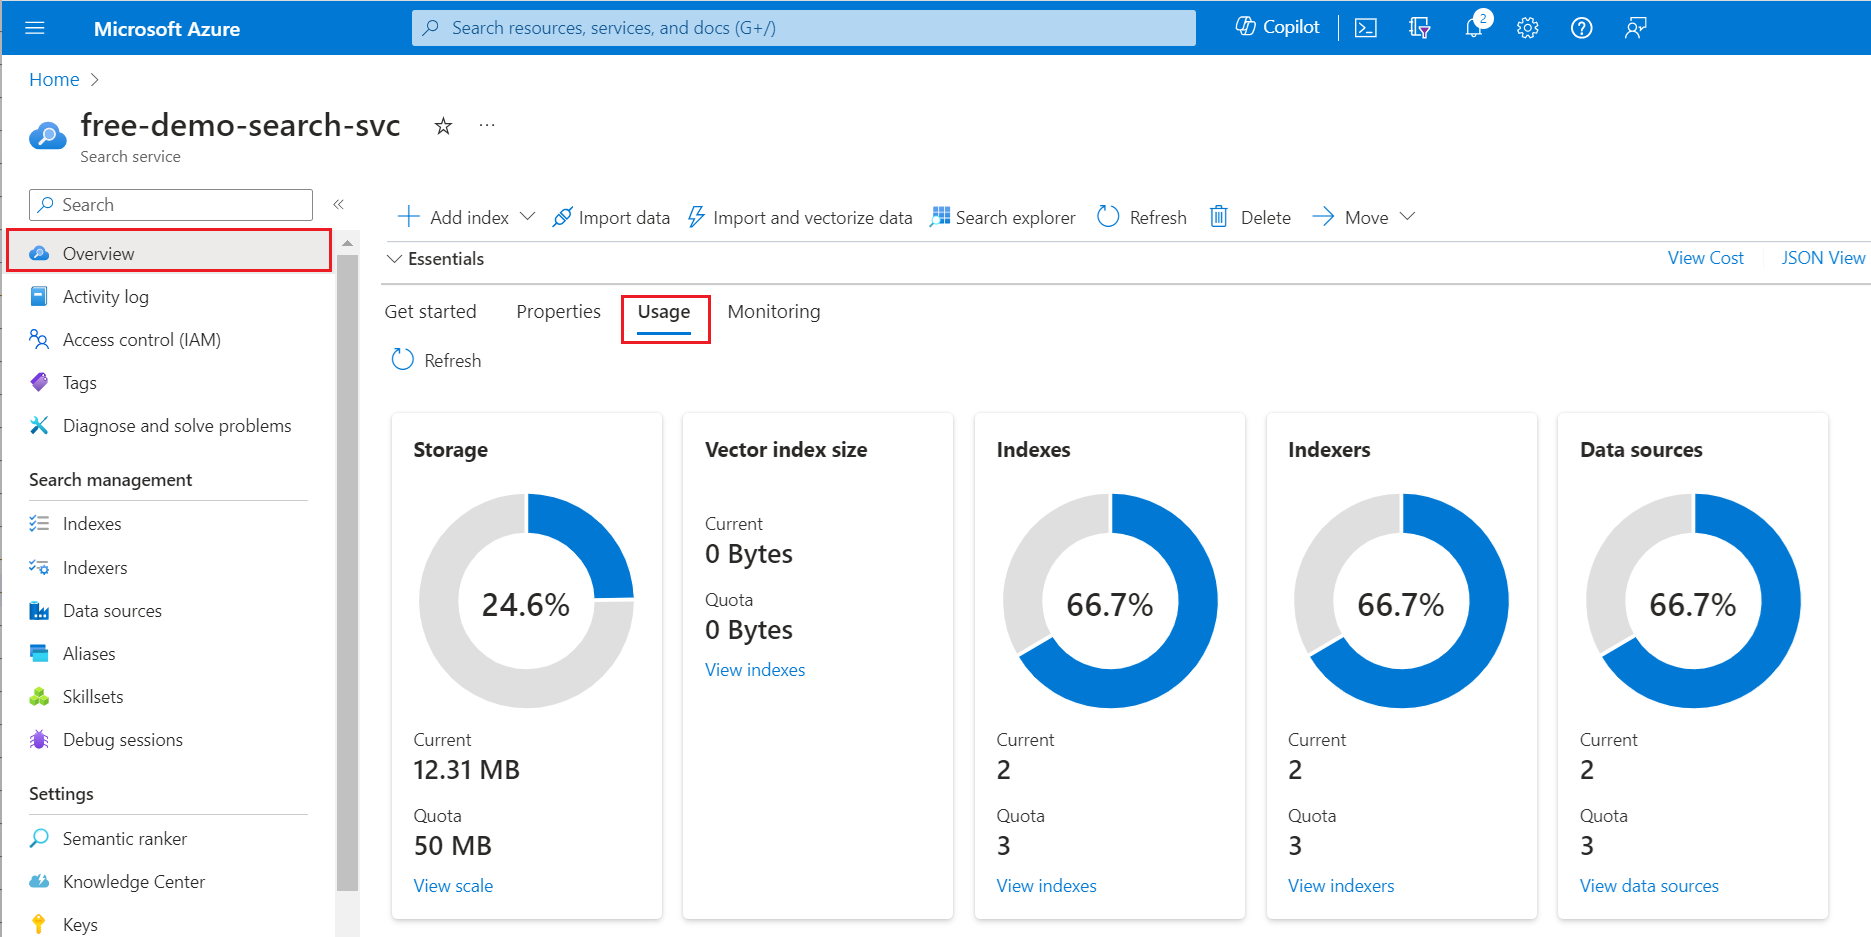 Screenshot of the Overview page for an Azure AI Search service instance in the Azure portal, showing the number of indexes, indexers, and data sources.